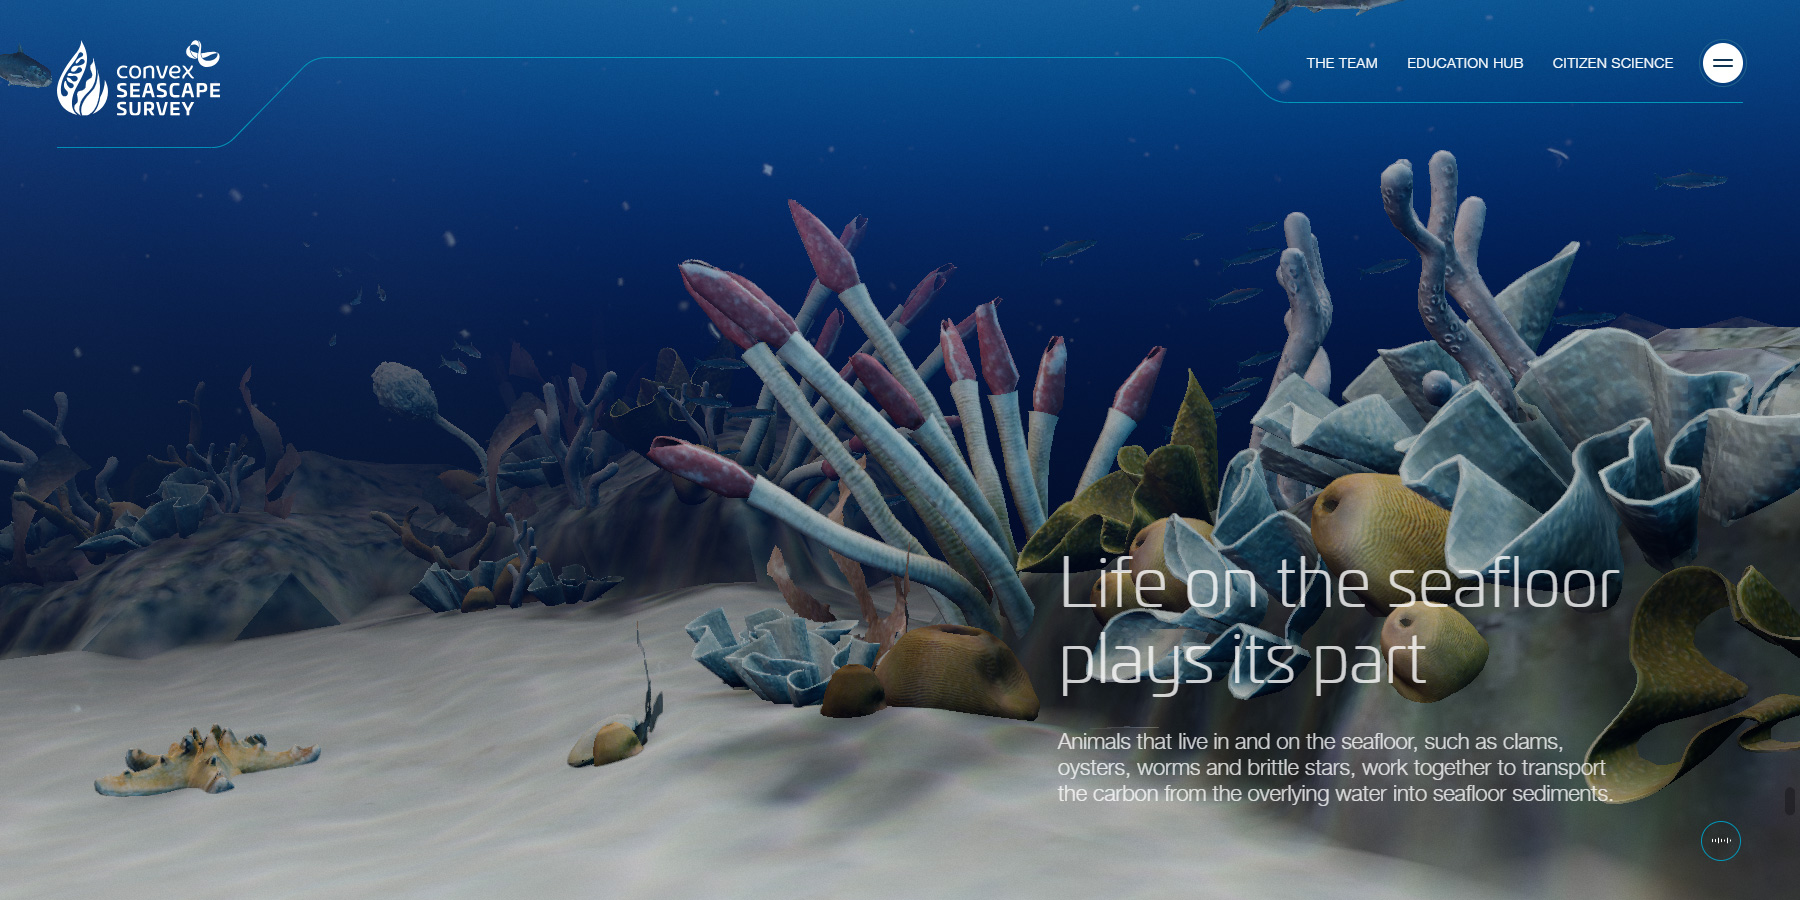 Convex Seascape Survey - Website of the Day